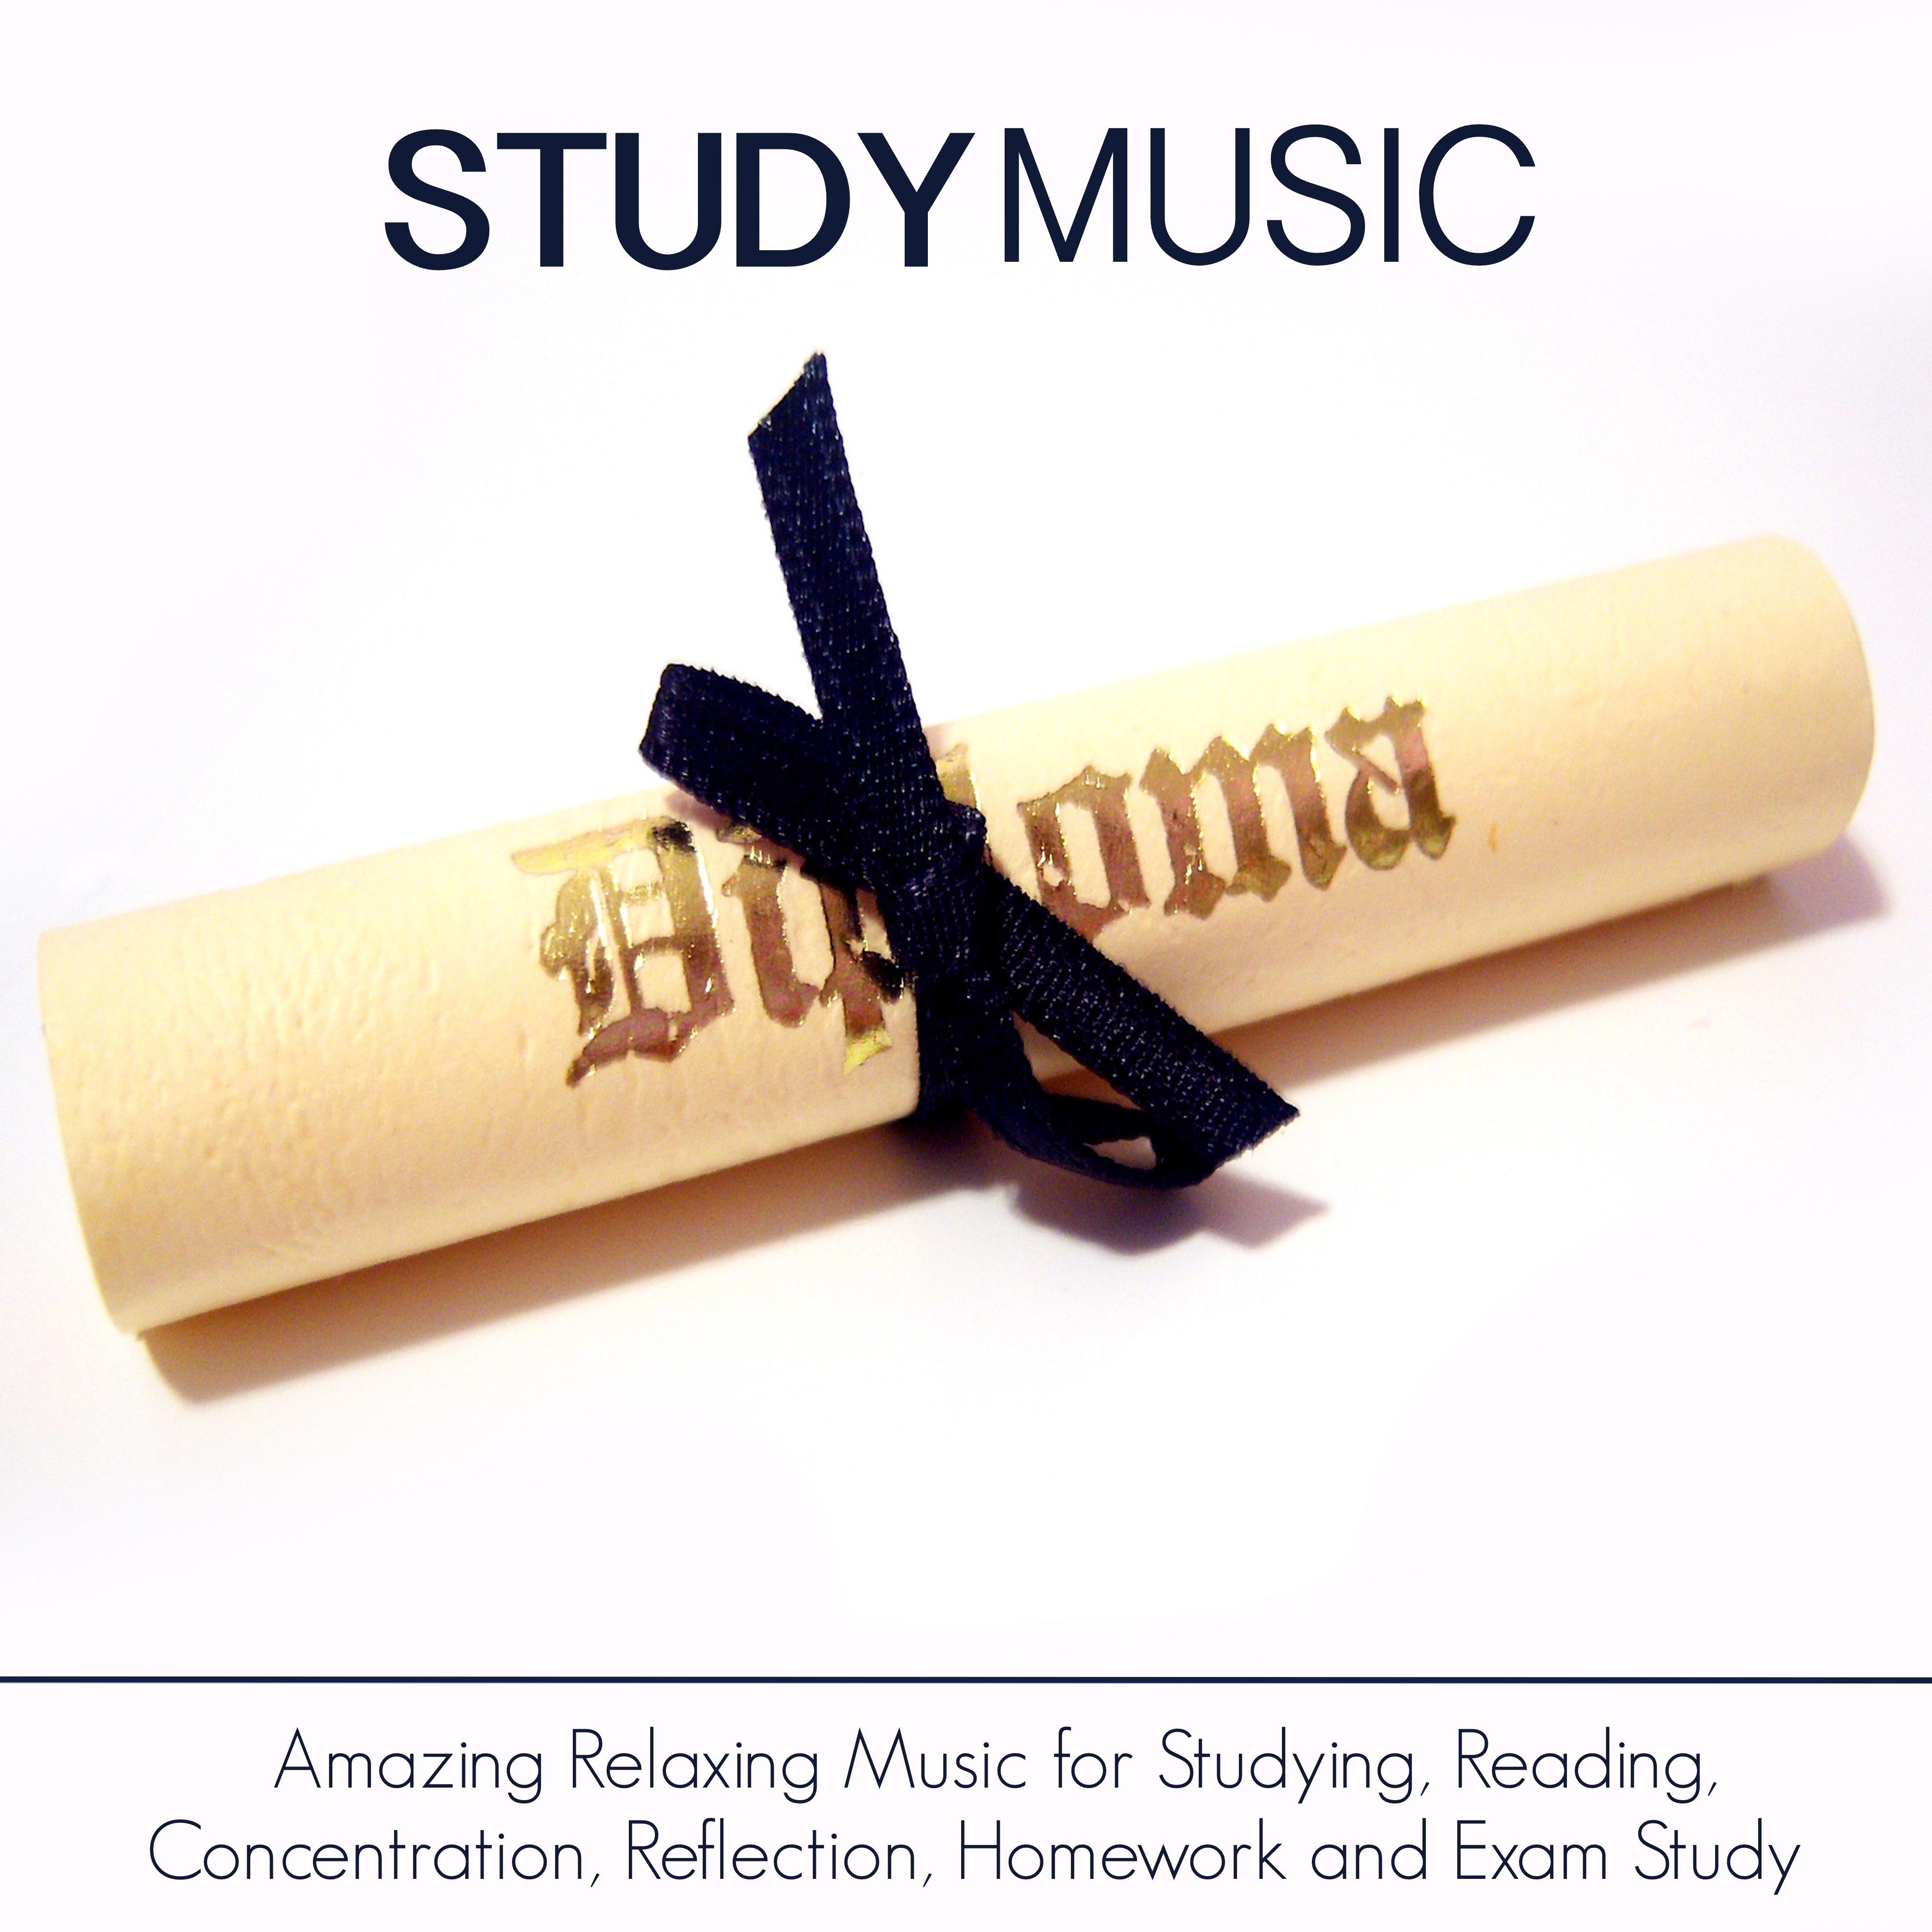 Study Music - Amazing Relaxing Music for Studying, Reading, Concentration, Reflection, Homework and Exam Study